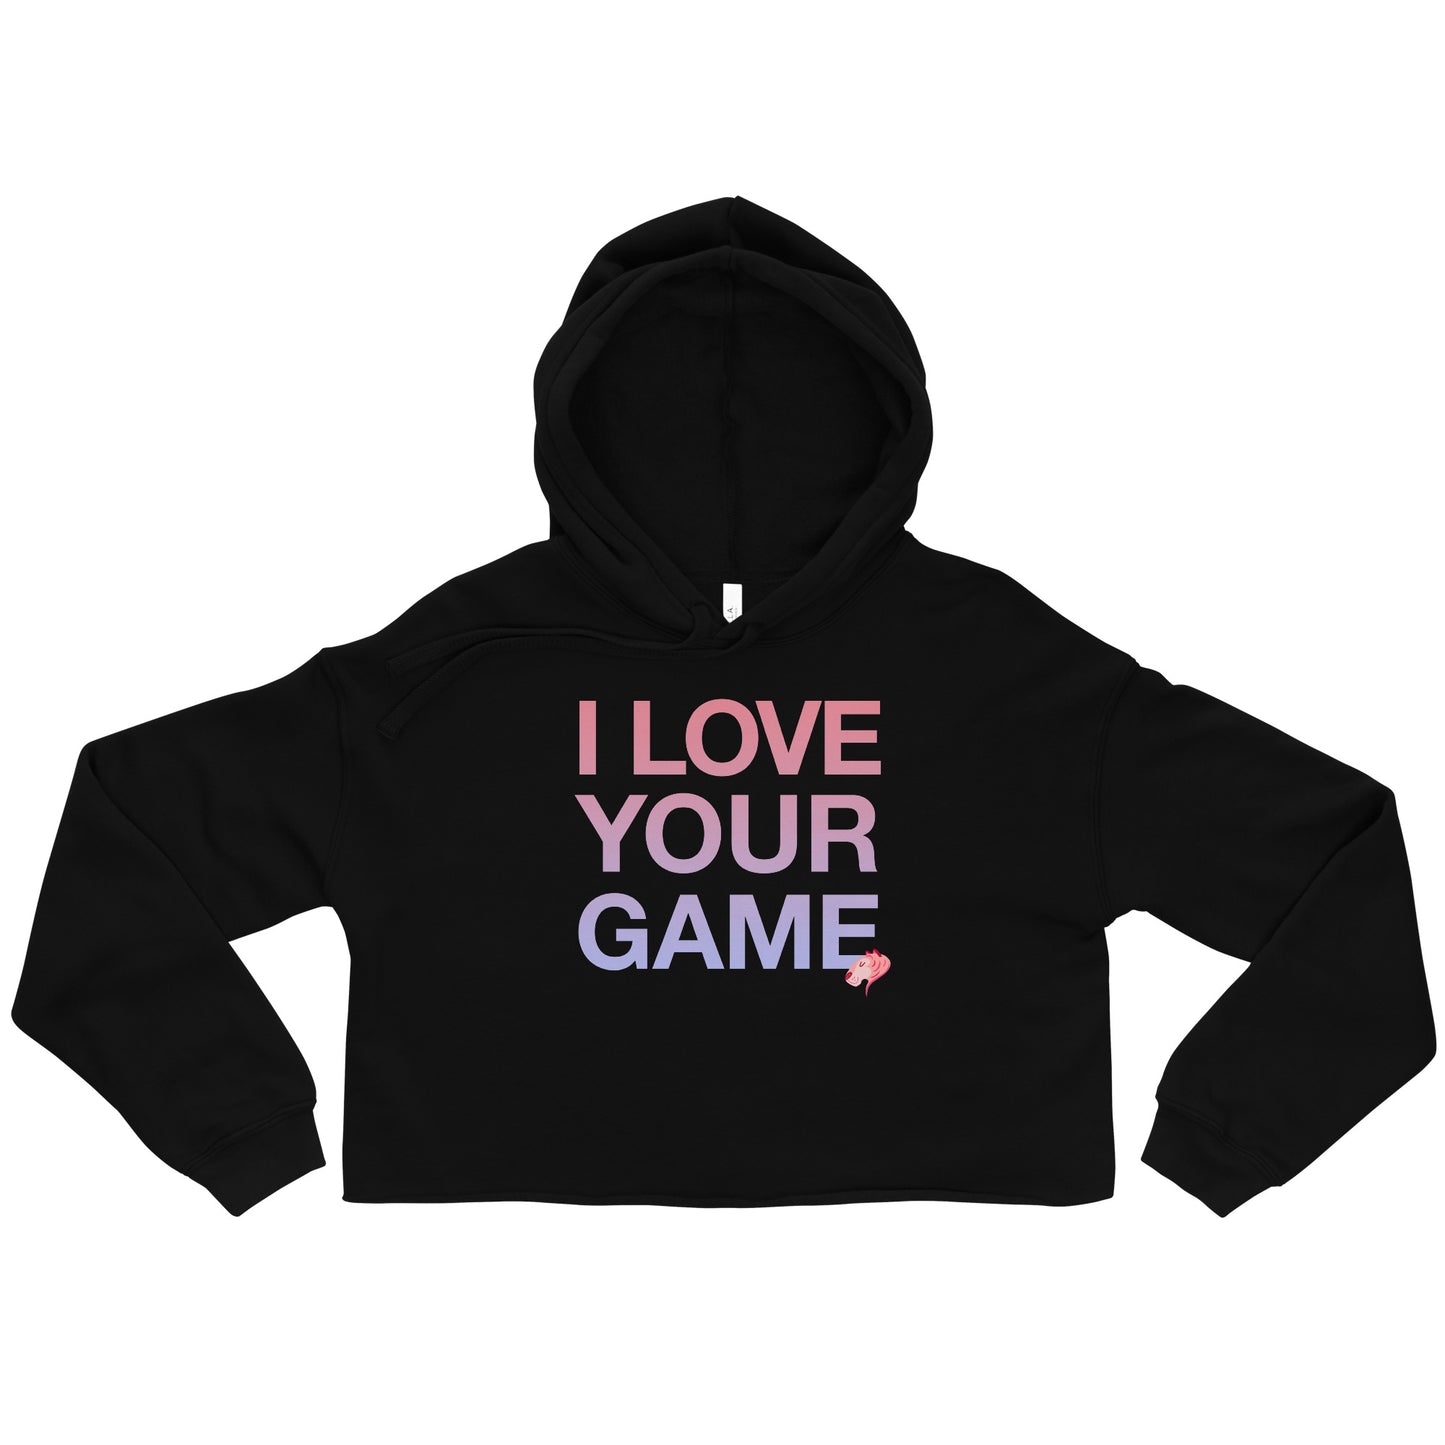 I LOVE YOUR GAME Crop Hoodie